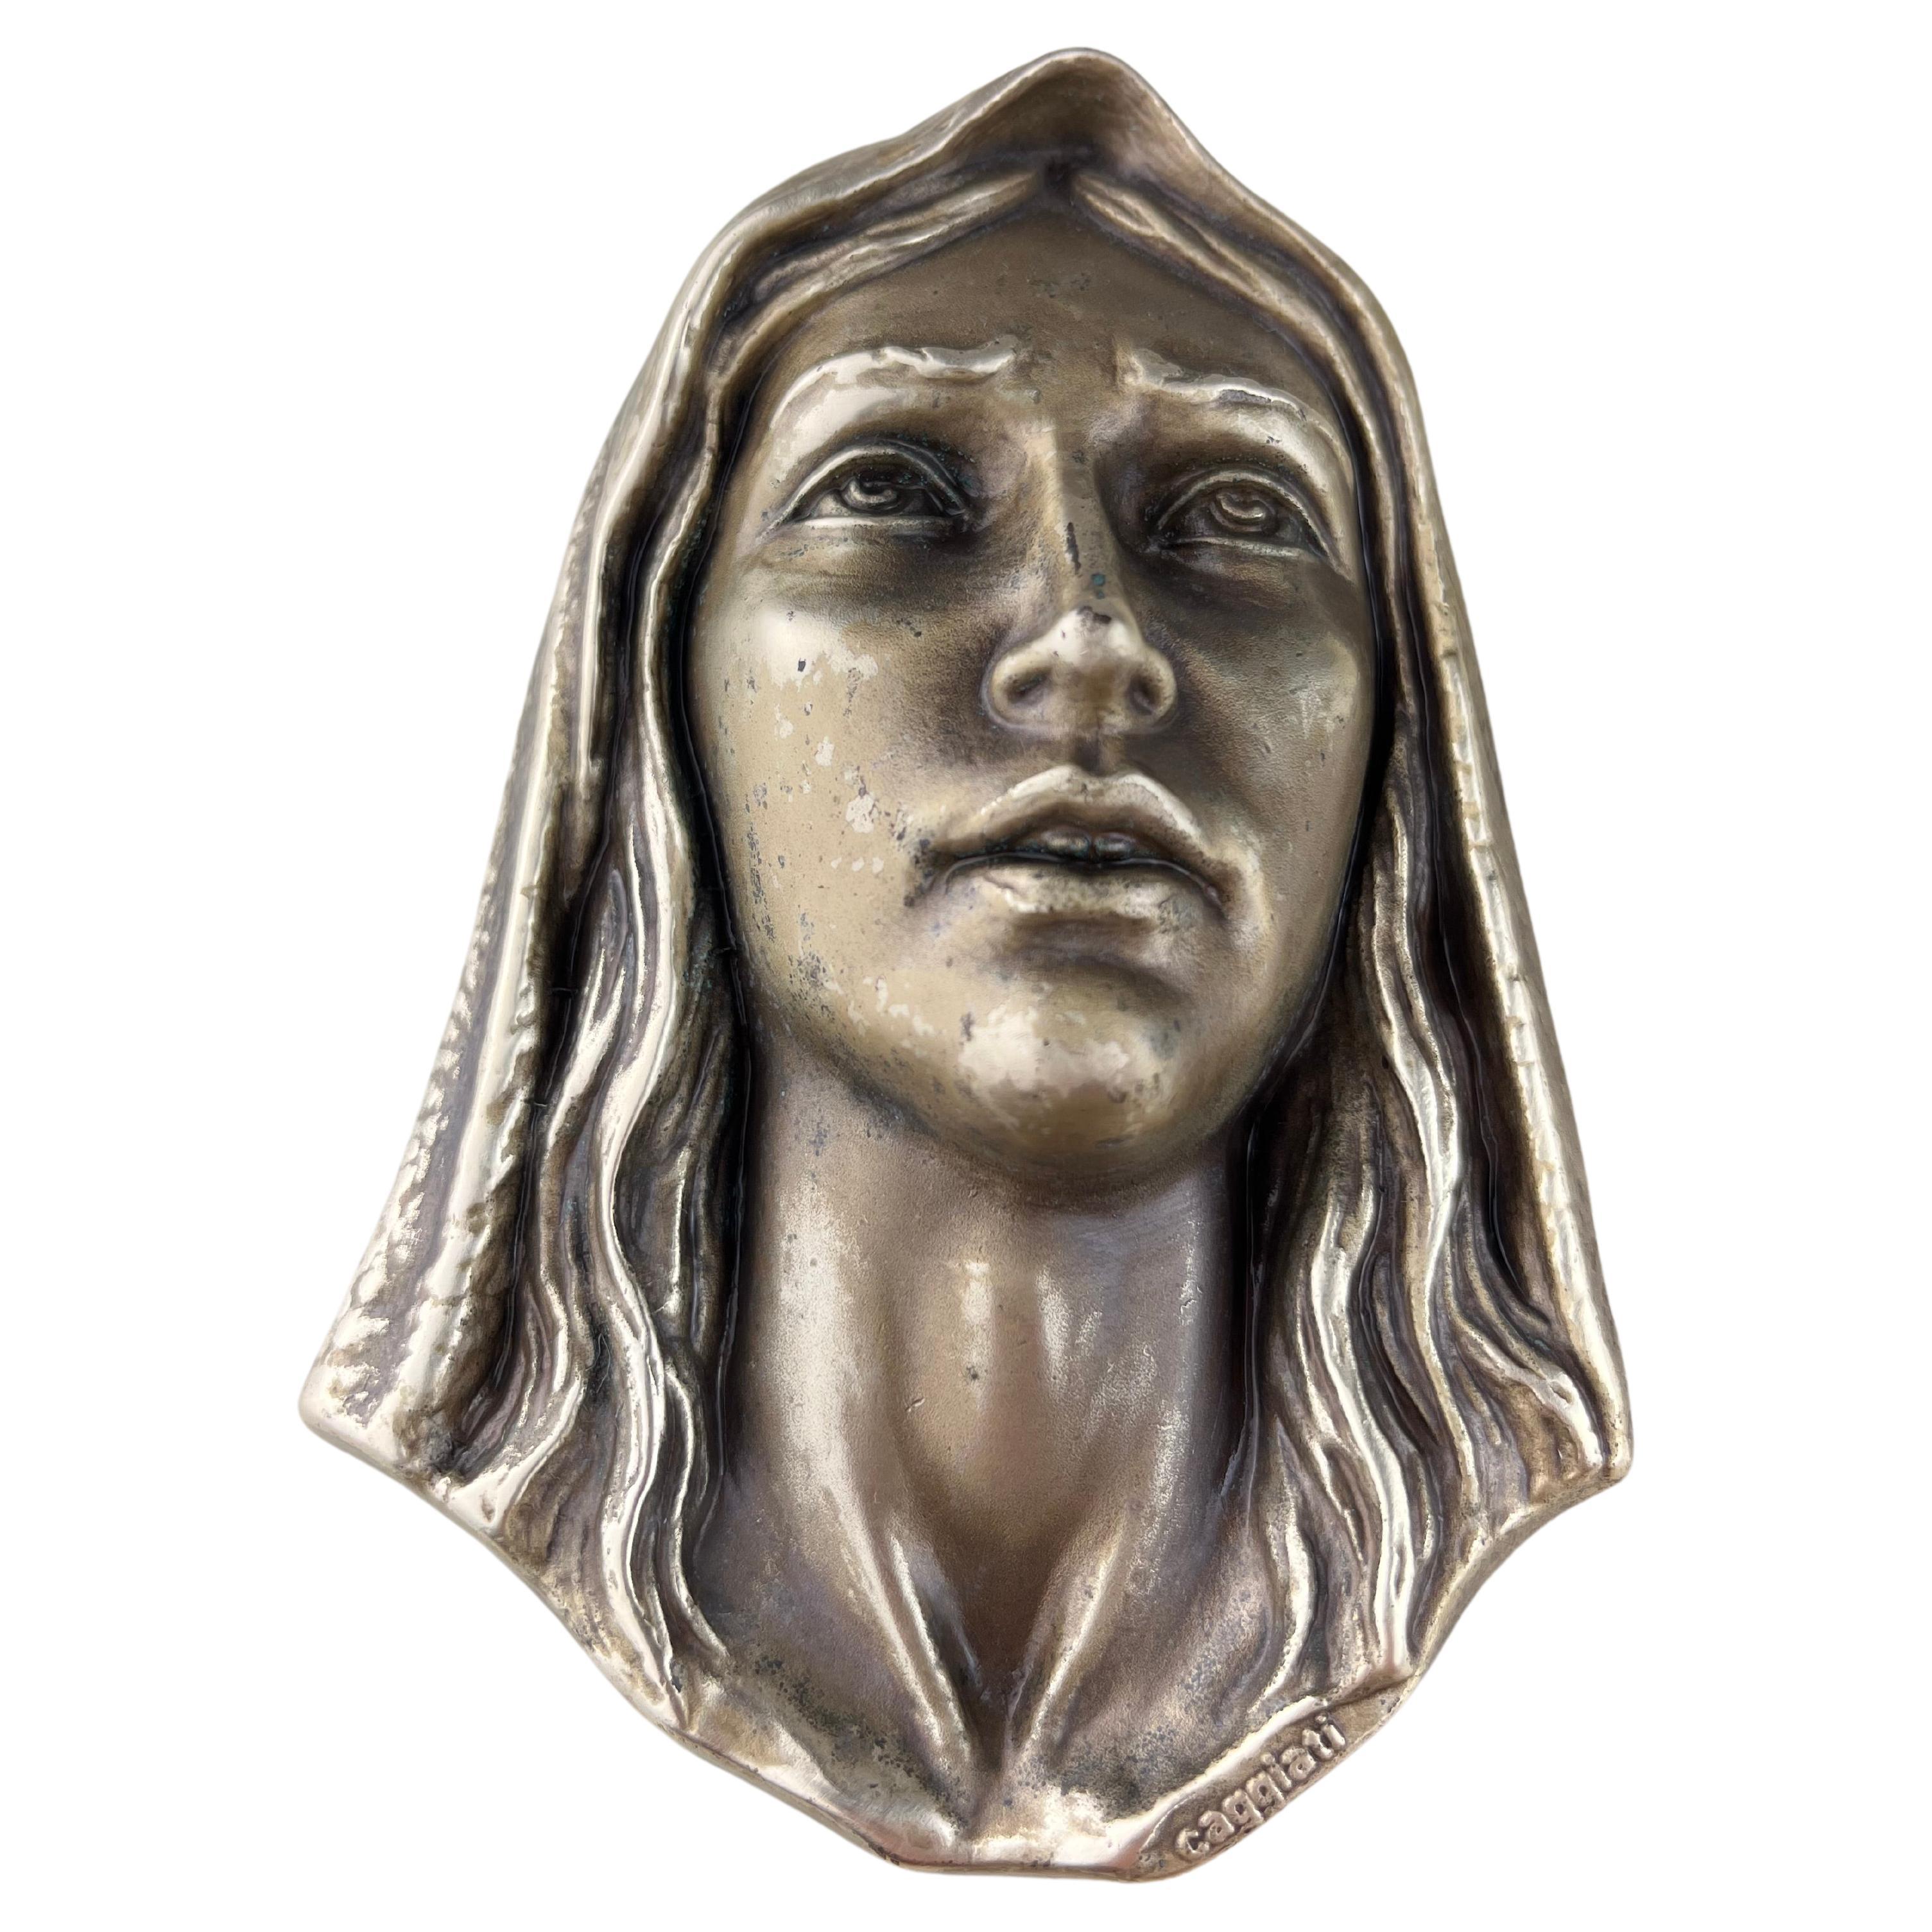 Brass Madonna's face, Italy, 1980s